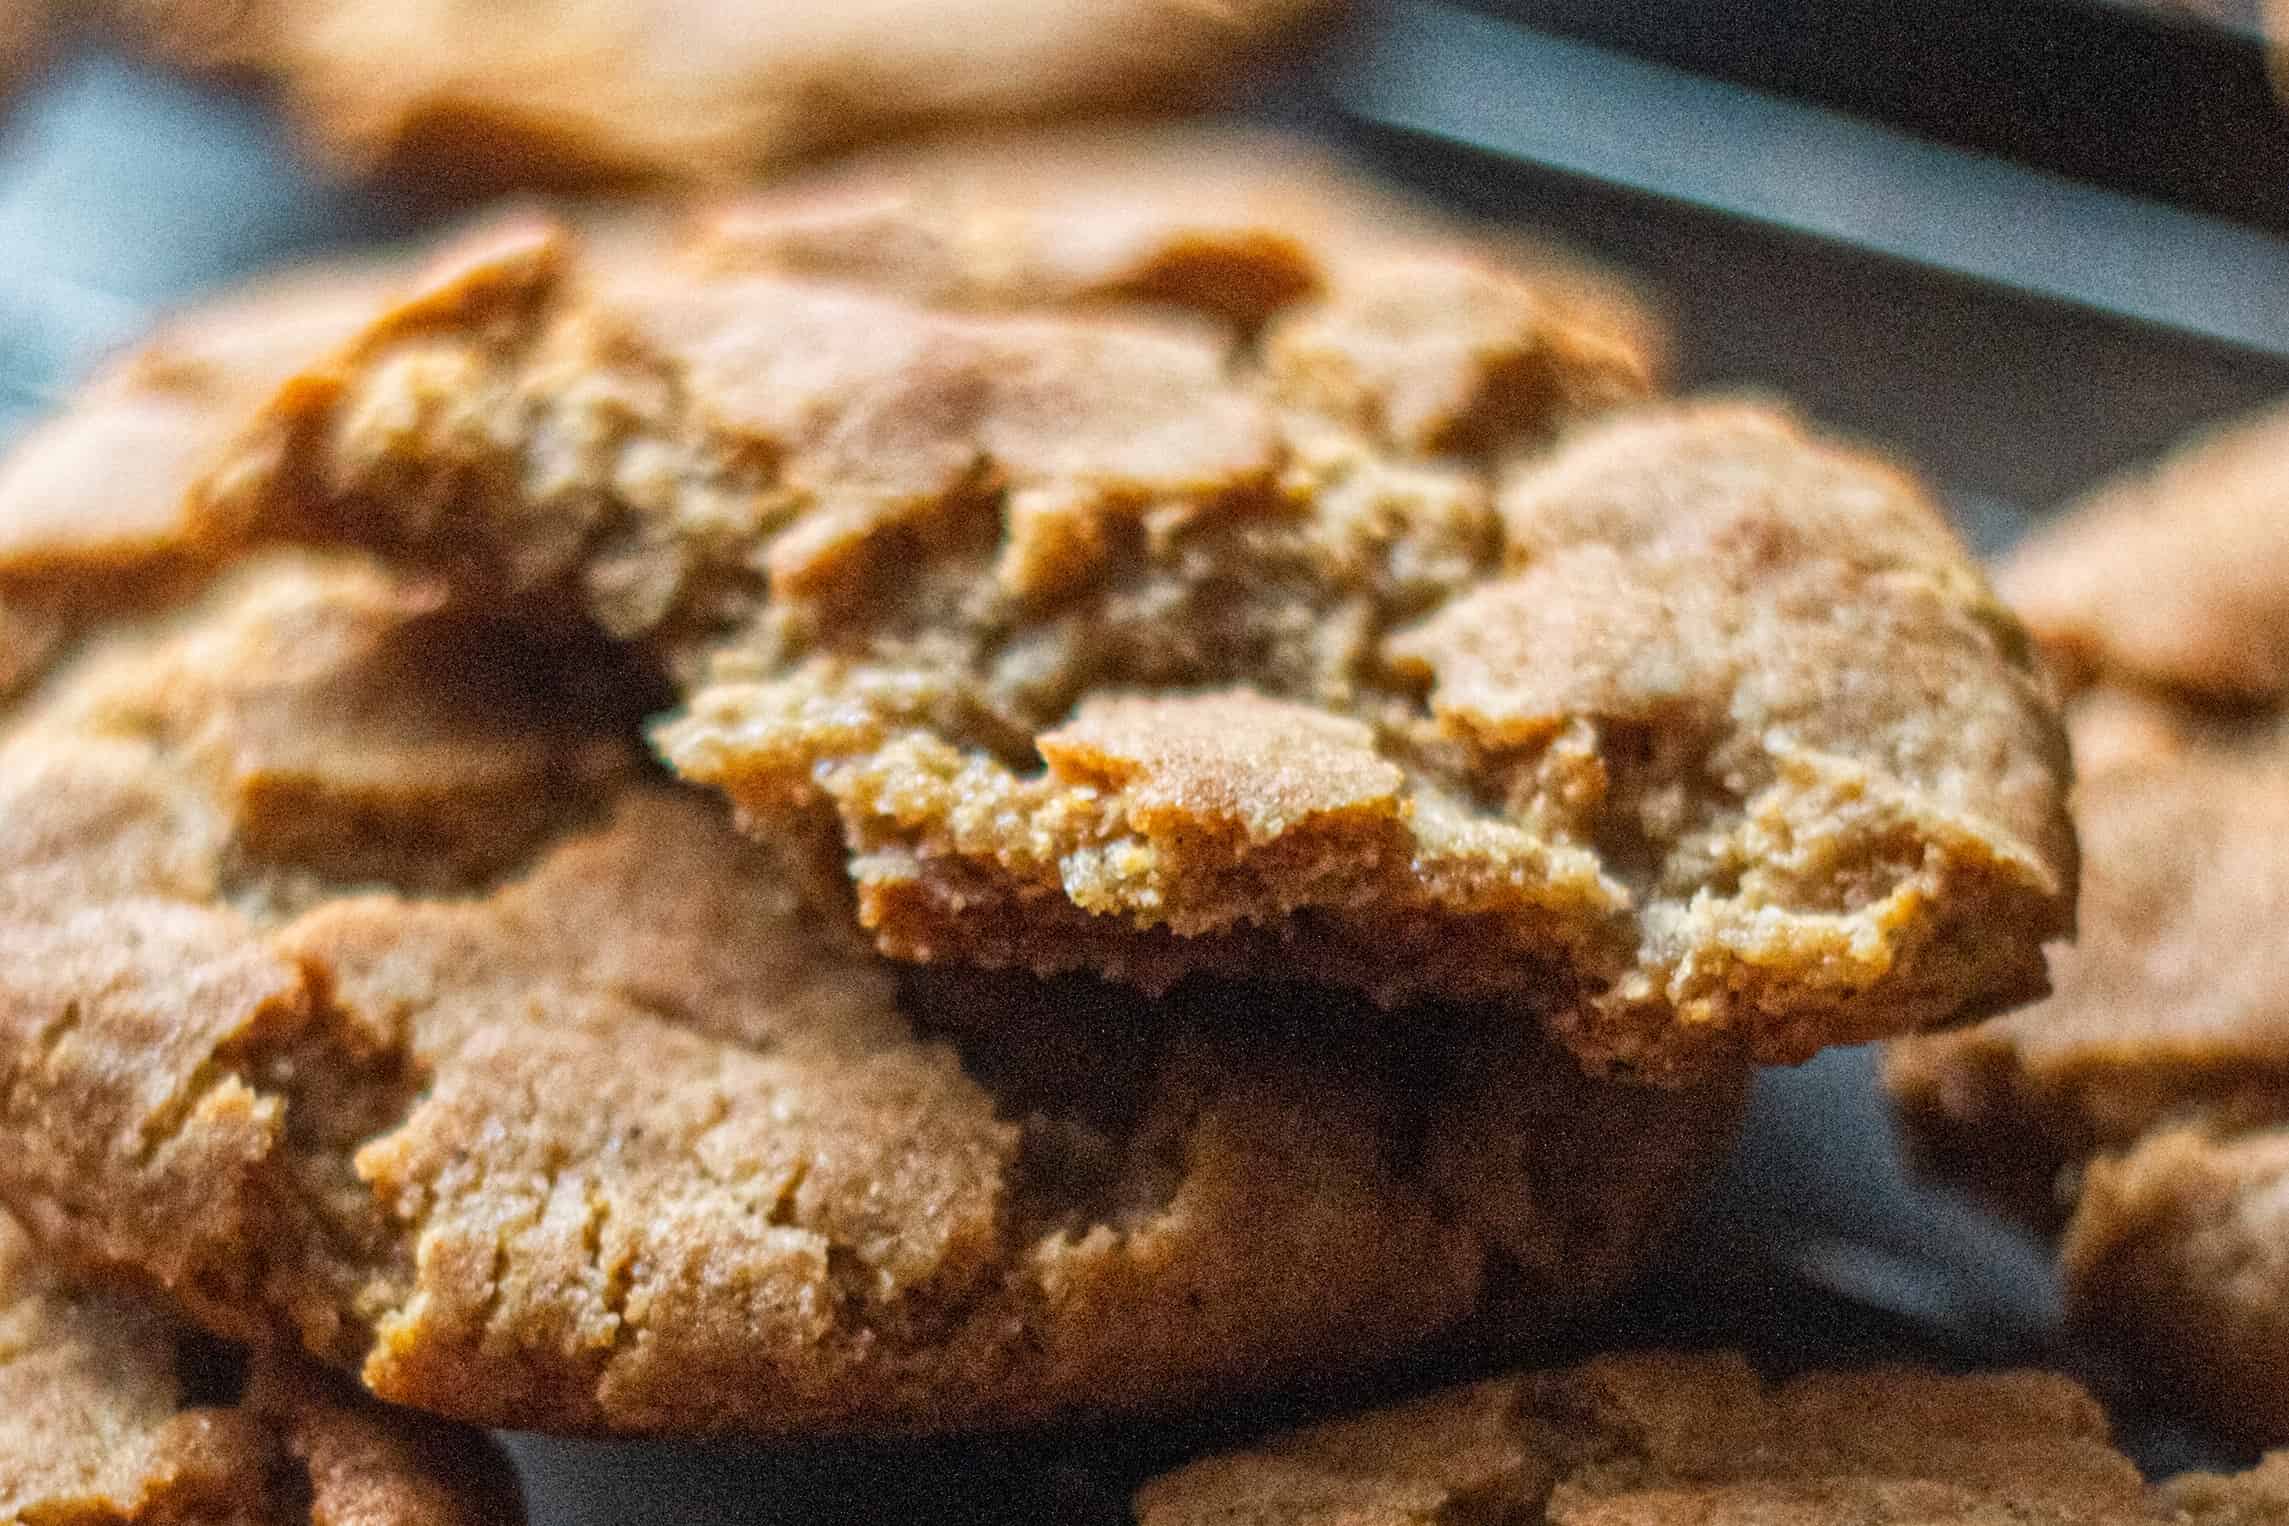 Baked ginger cookies